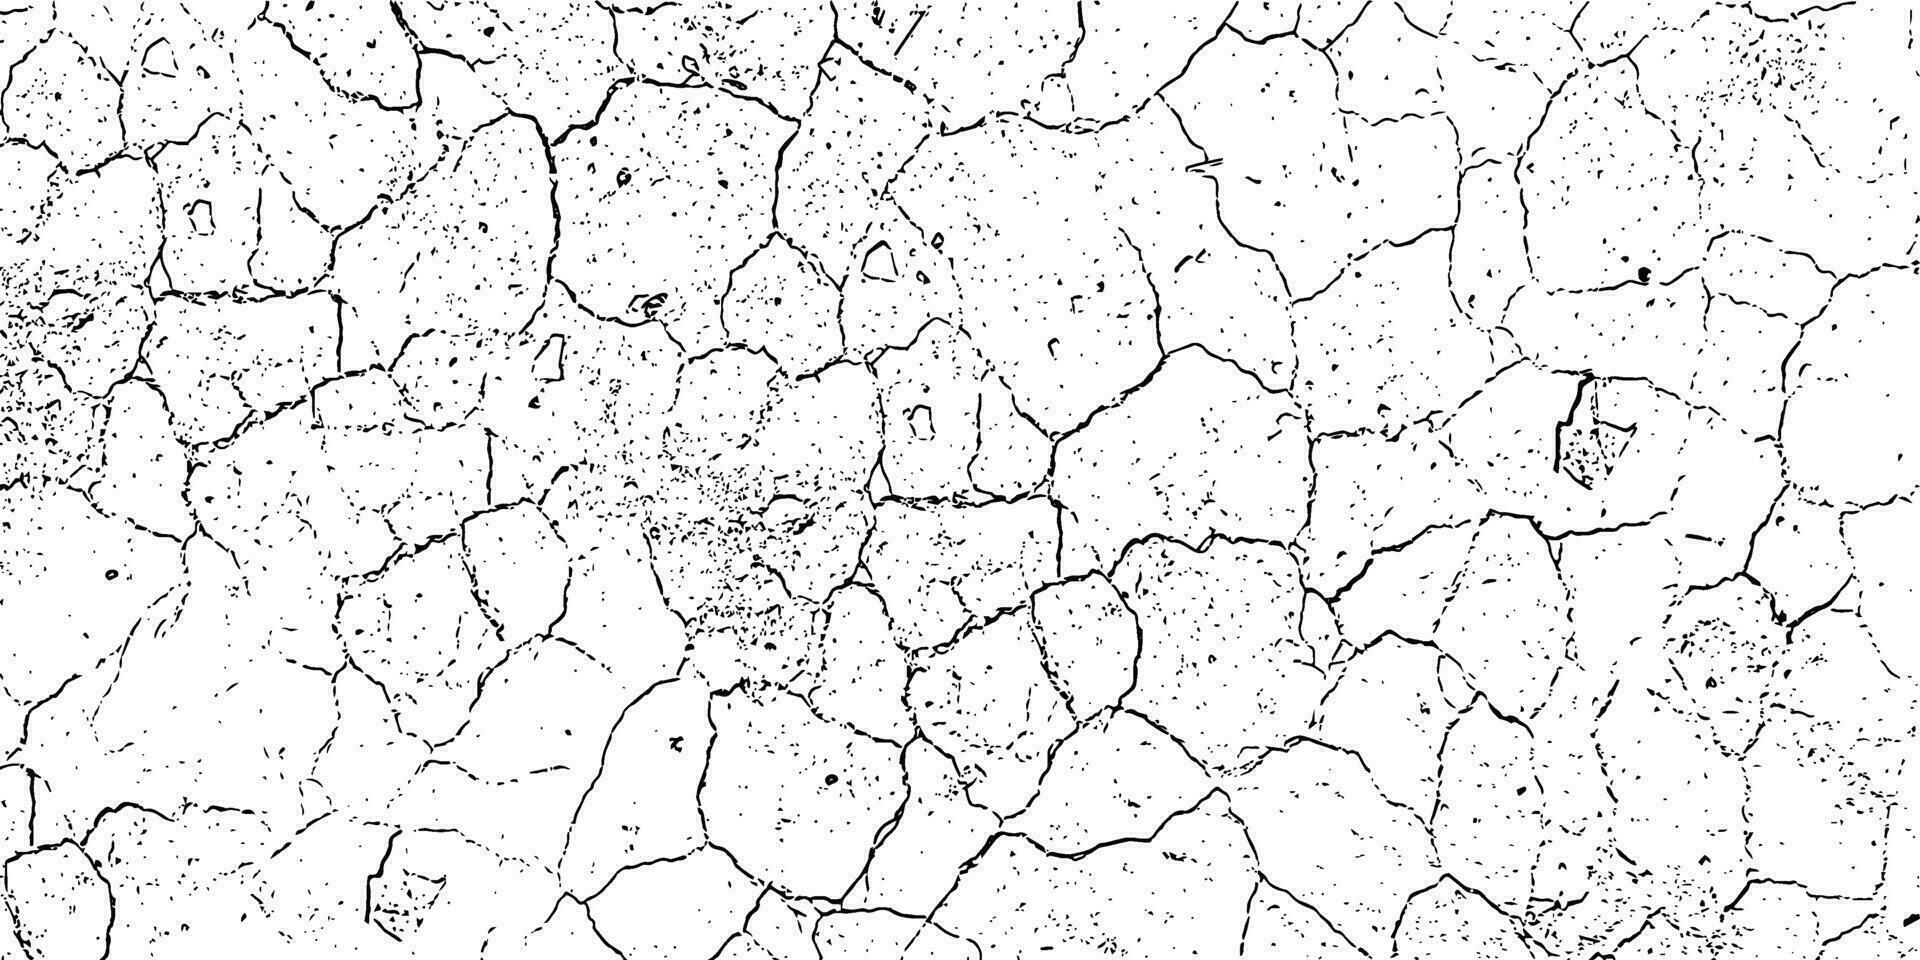 a black and white vector of cracked concrete, grunge texture, broken effect, grunge effect vector background, earthquake crack, grunge backgrounds, broken glass, textures grunge, swirls grunge